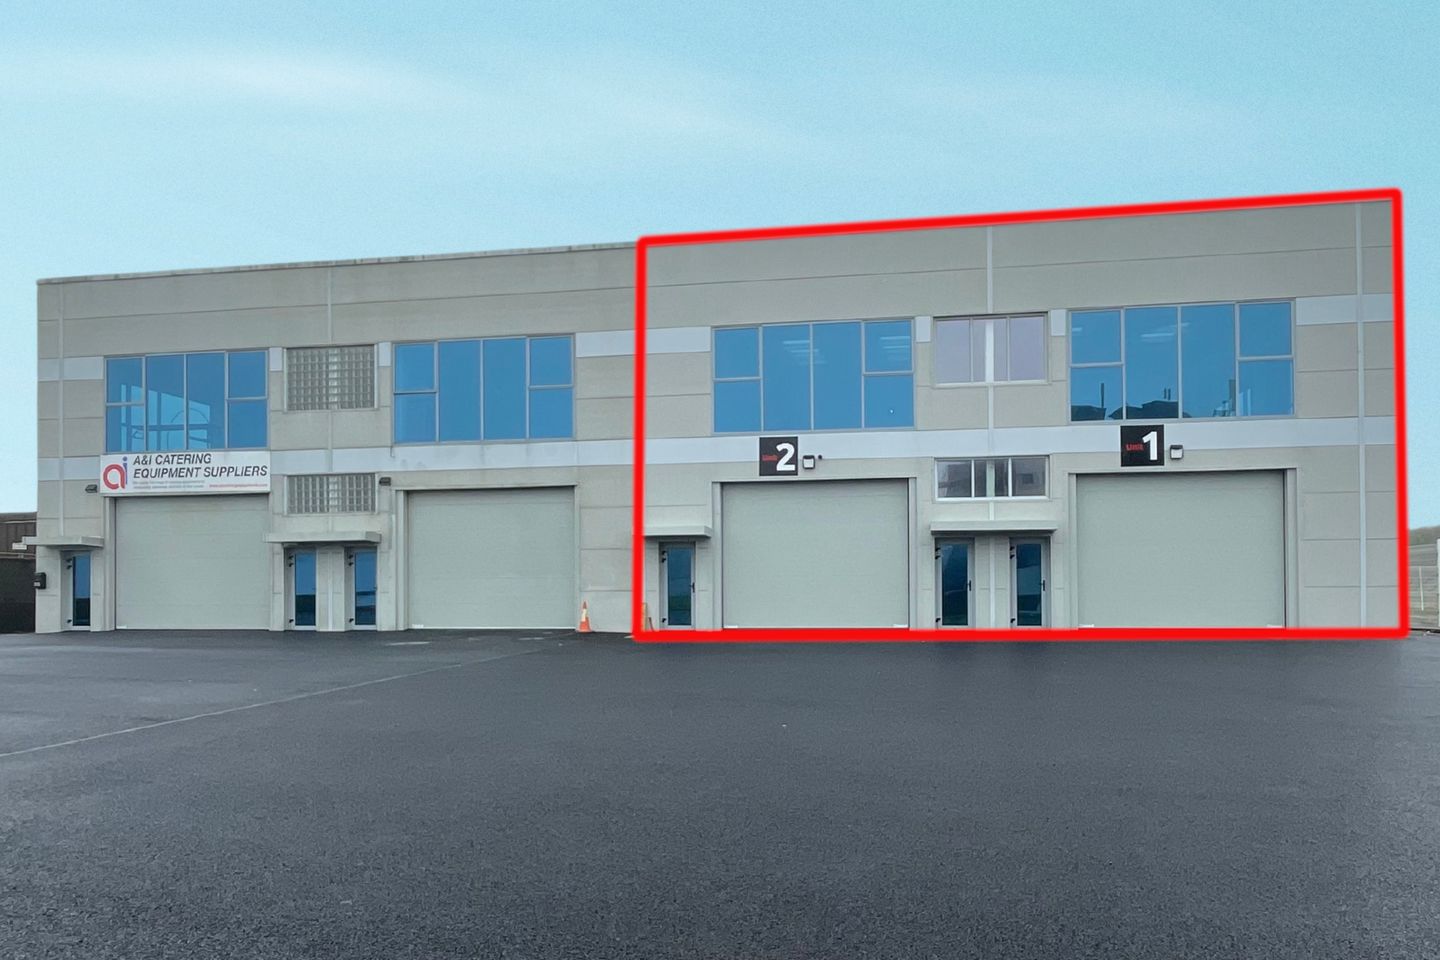 1&2 Gulfstream Avenue, Airport Business Park, Airport Road, Waterford, Waterford City, Co. Waterford